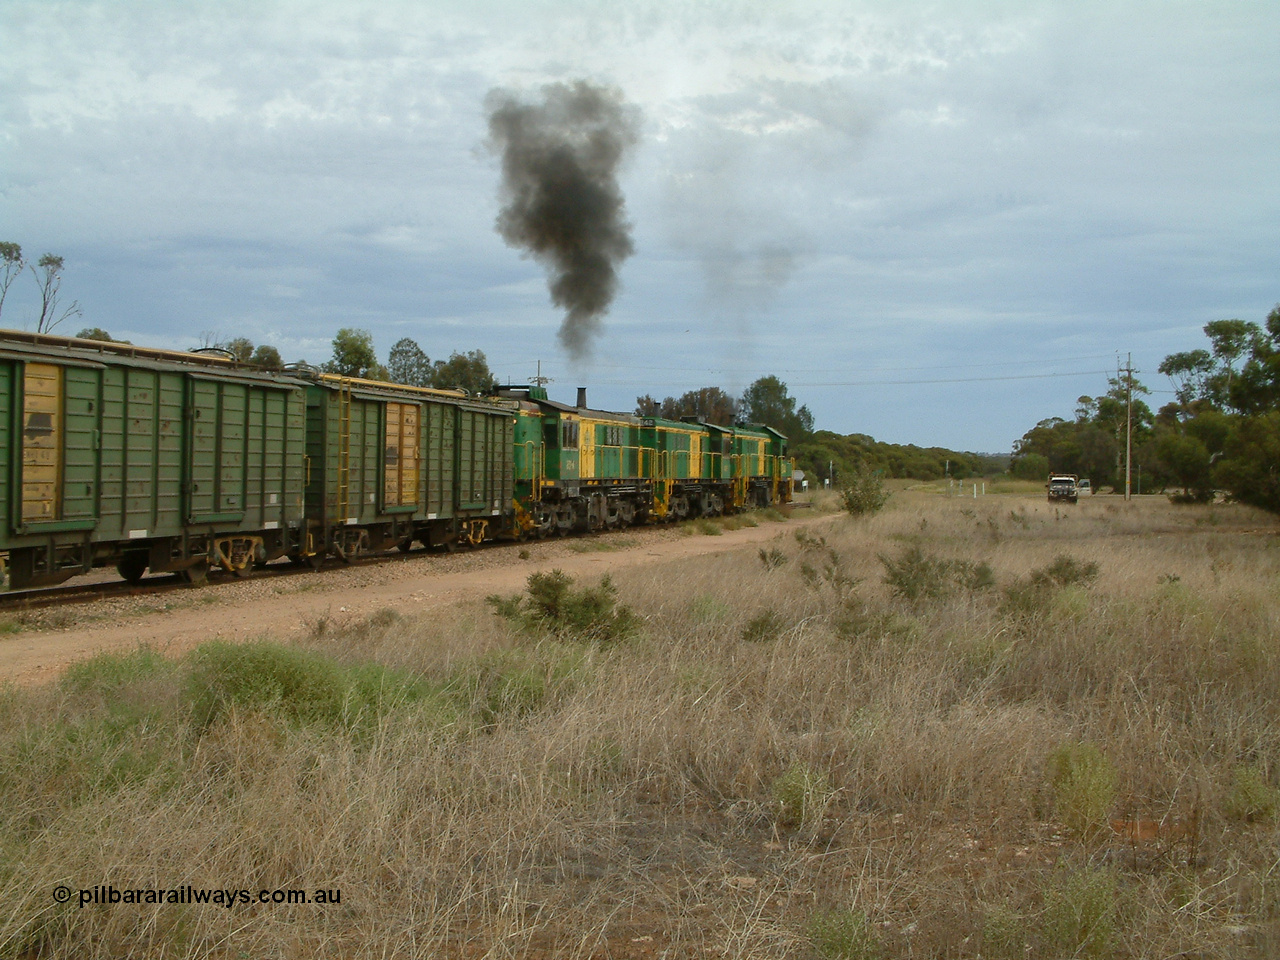 030407 082313
Wudinna, empty grain train shunts forward with a trio of former Australian National locomotives with rebuilt former AE Goodwin ALCo model DL531 830 class ex 839, serial 83730, rebuilt by Port Augusta Workshops to DA class, DA 4 leading two AE Goodwin ALCo model DL531 830 class units 842, serial 84140 and 851 serial 84137, 851 having been on the Eyre Peninsula since delivered in 1962, to shunt off empty waggons into the grain siding. 7th April 2003.
Keywords: DA-class;DA4;83730;Port-Augusta-WS;ALCo;DL531G/1;830-class;839;rebuild;